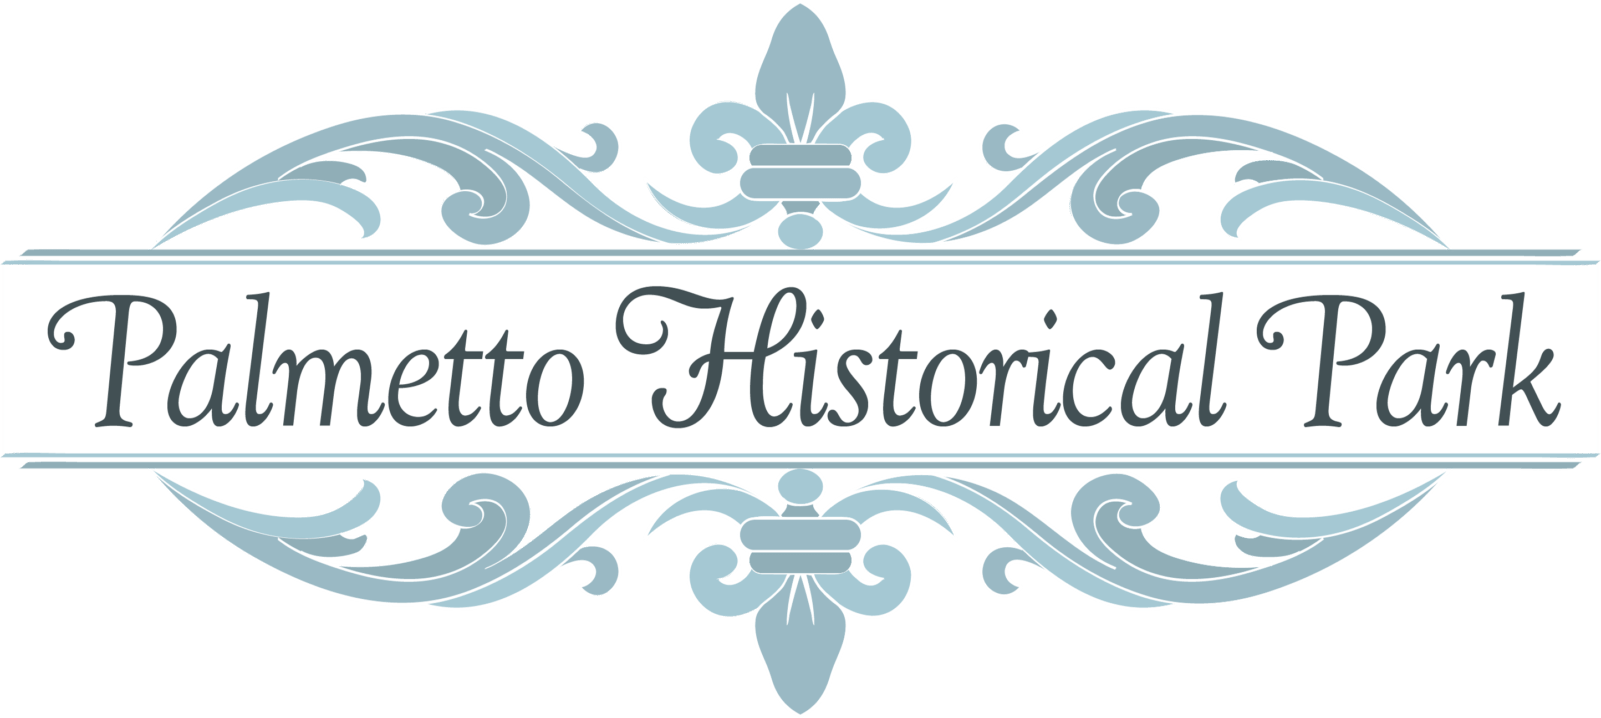 Palmetto Historical Park - Discover Our Heritage!